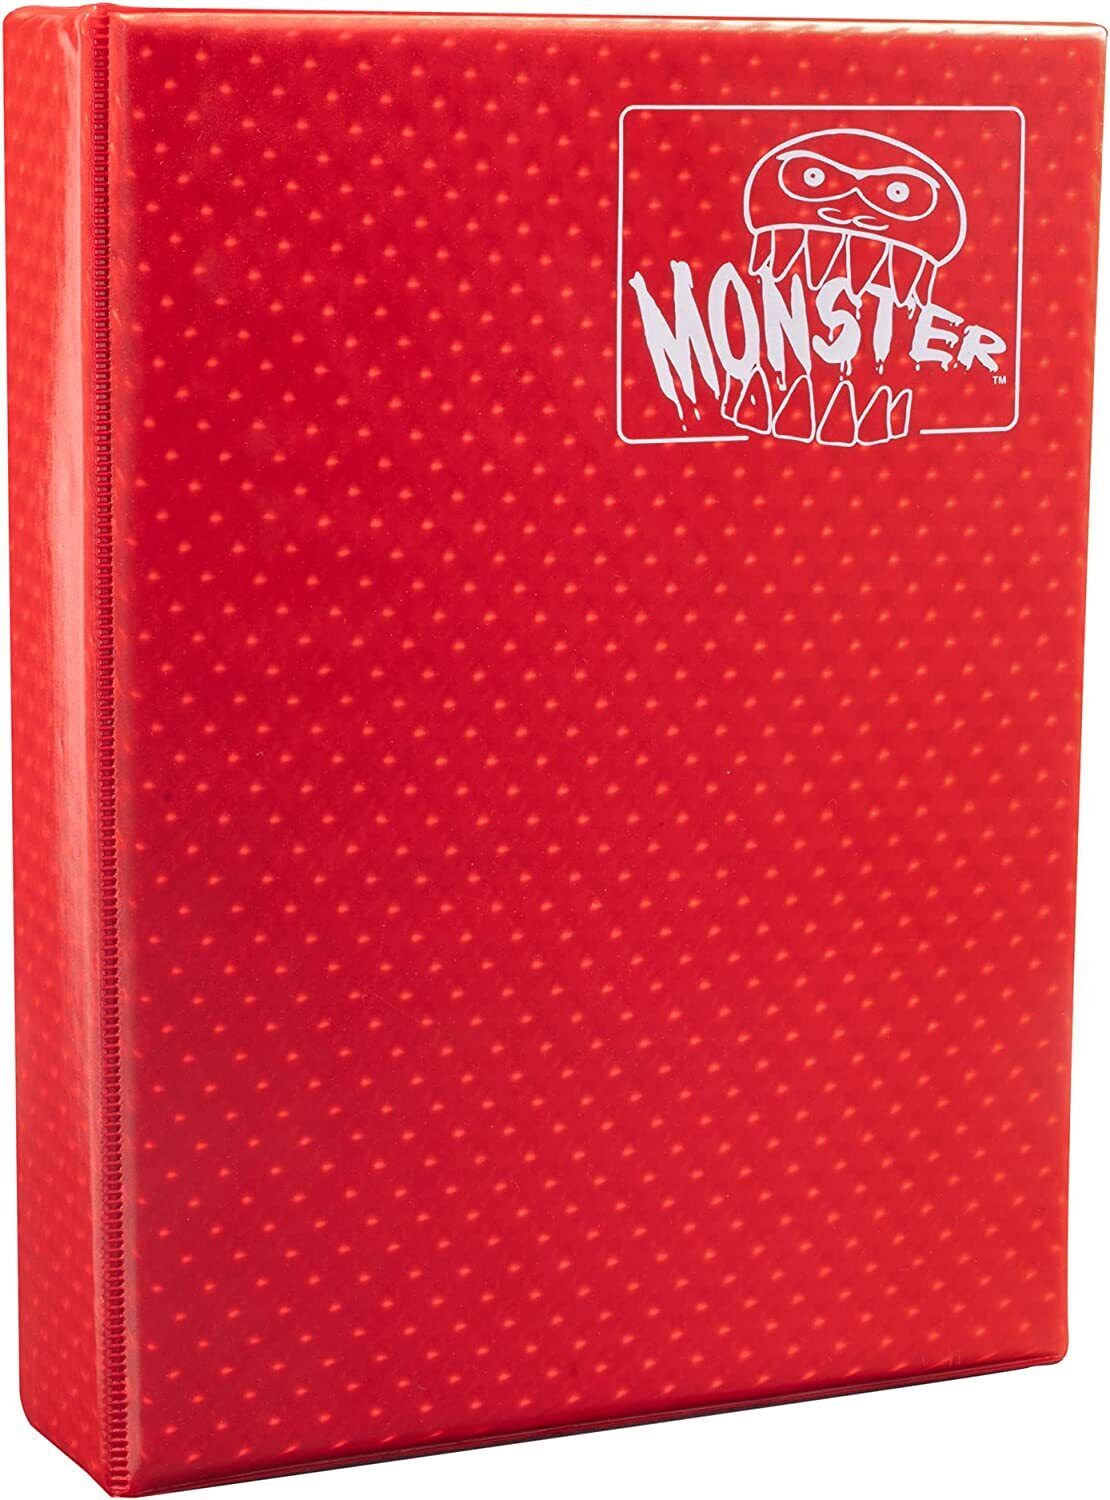 Monster Mega Holofoil Red Binder XL Size Hard Cover (Twice as Large)- Holds 720